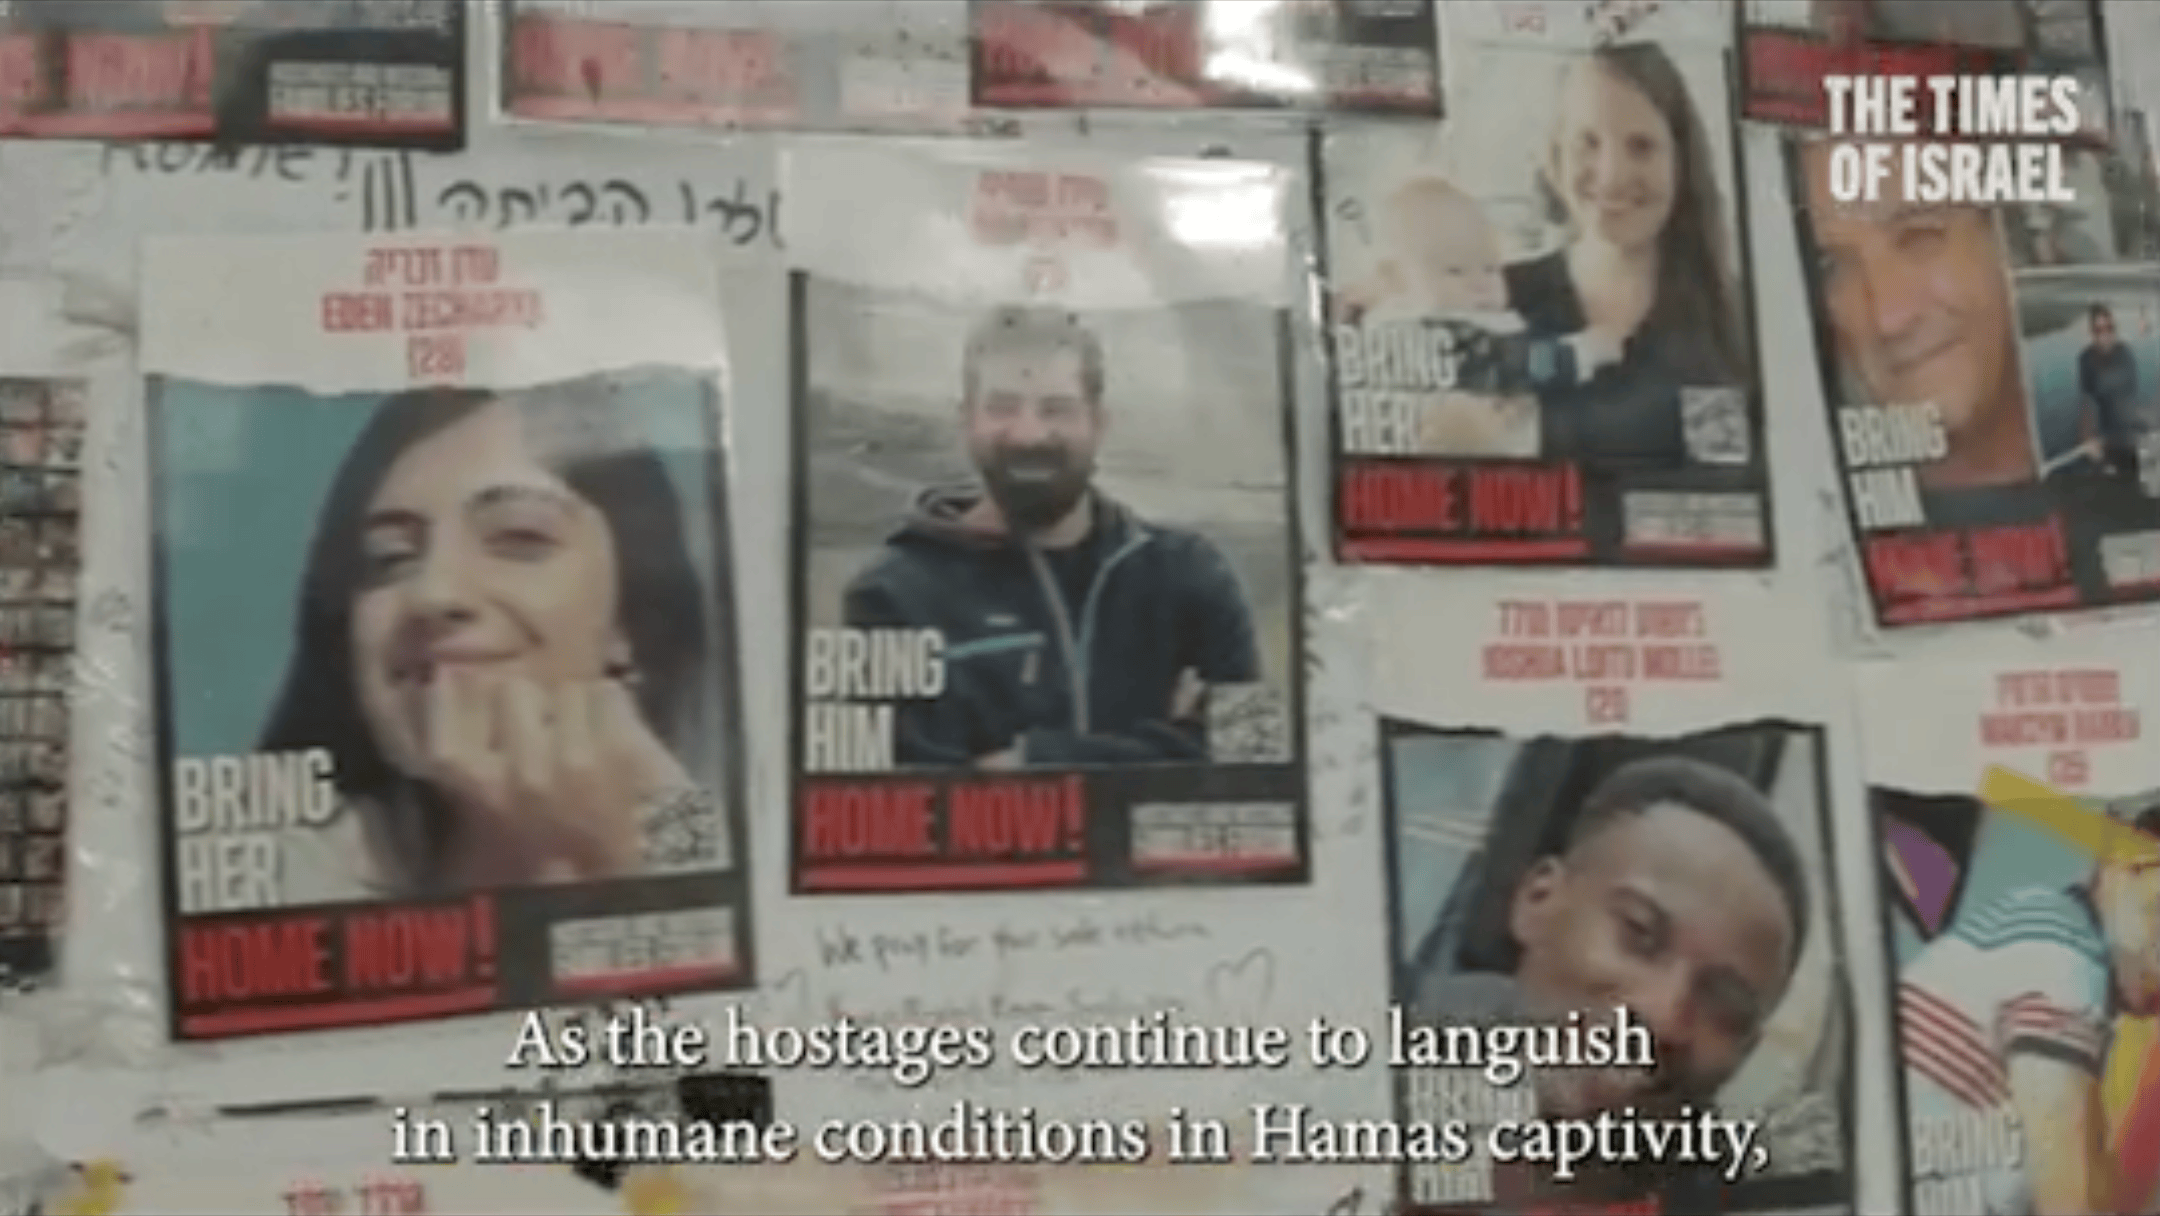 Pro-Palestinian students file complaint alleging Harvard failed to protect them